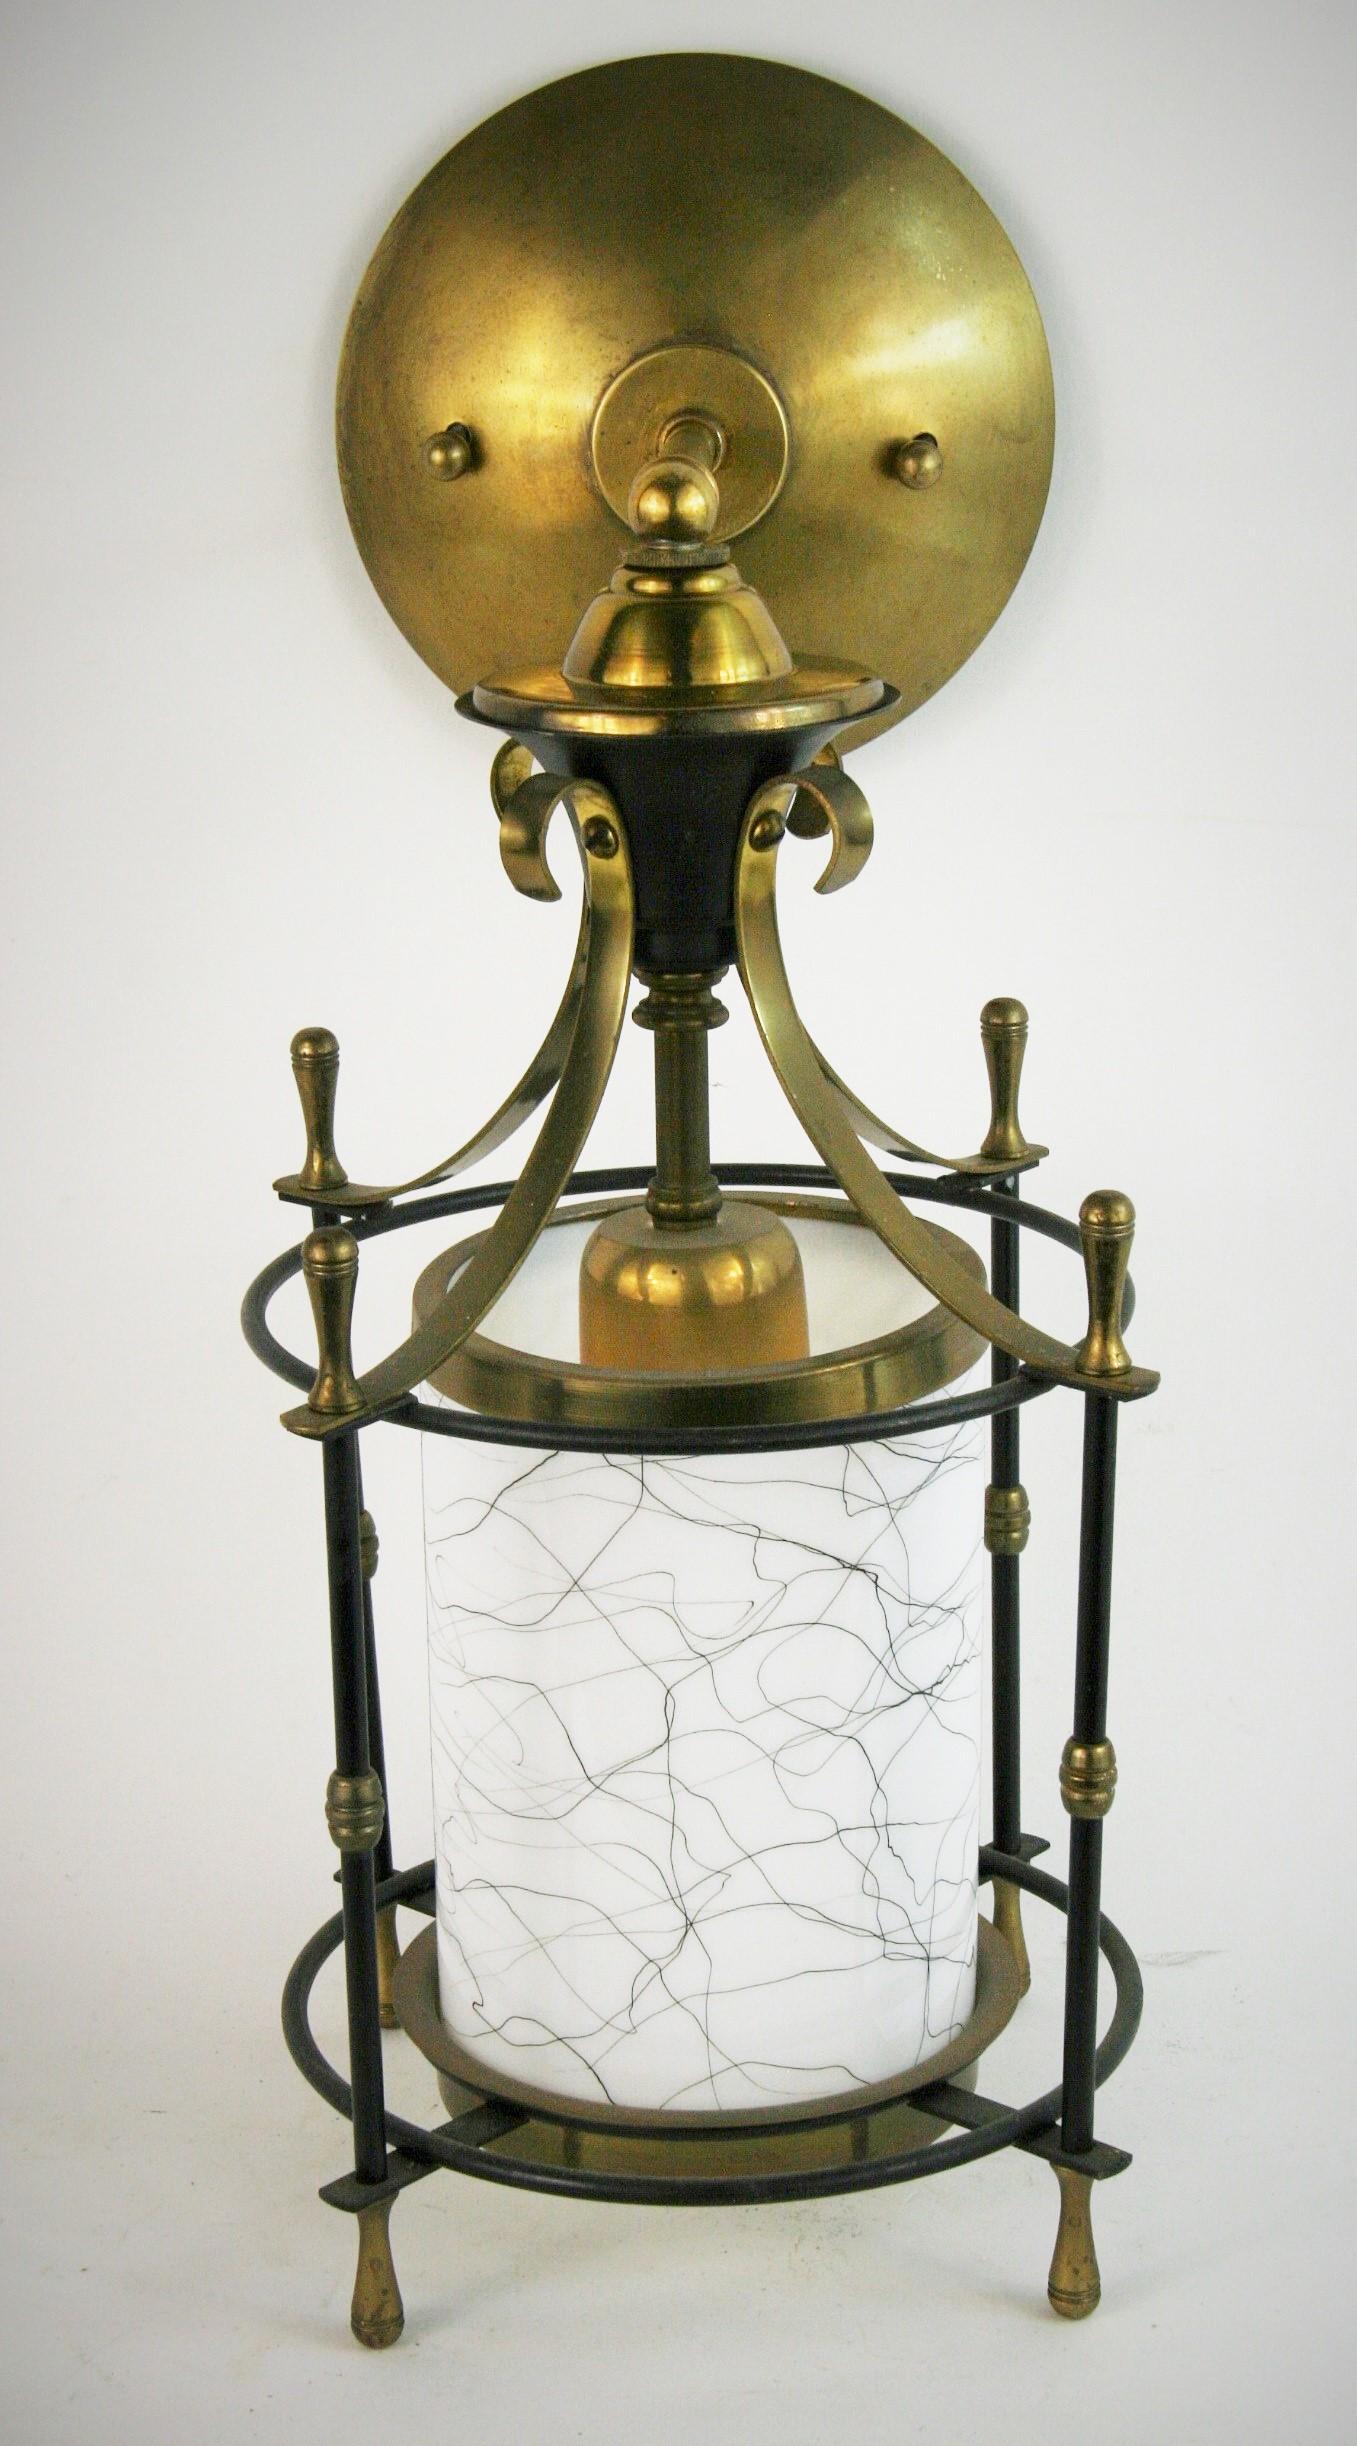 1589 French midcentury lantern wall sconces with glass shades with swirly black lines.
Rewired
60 watt Edison bulb.